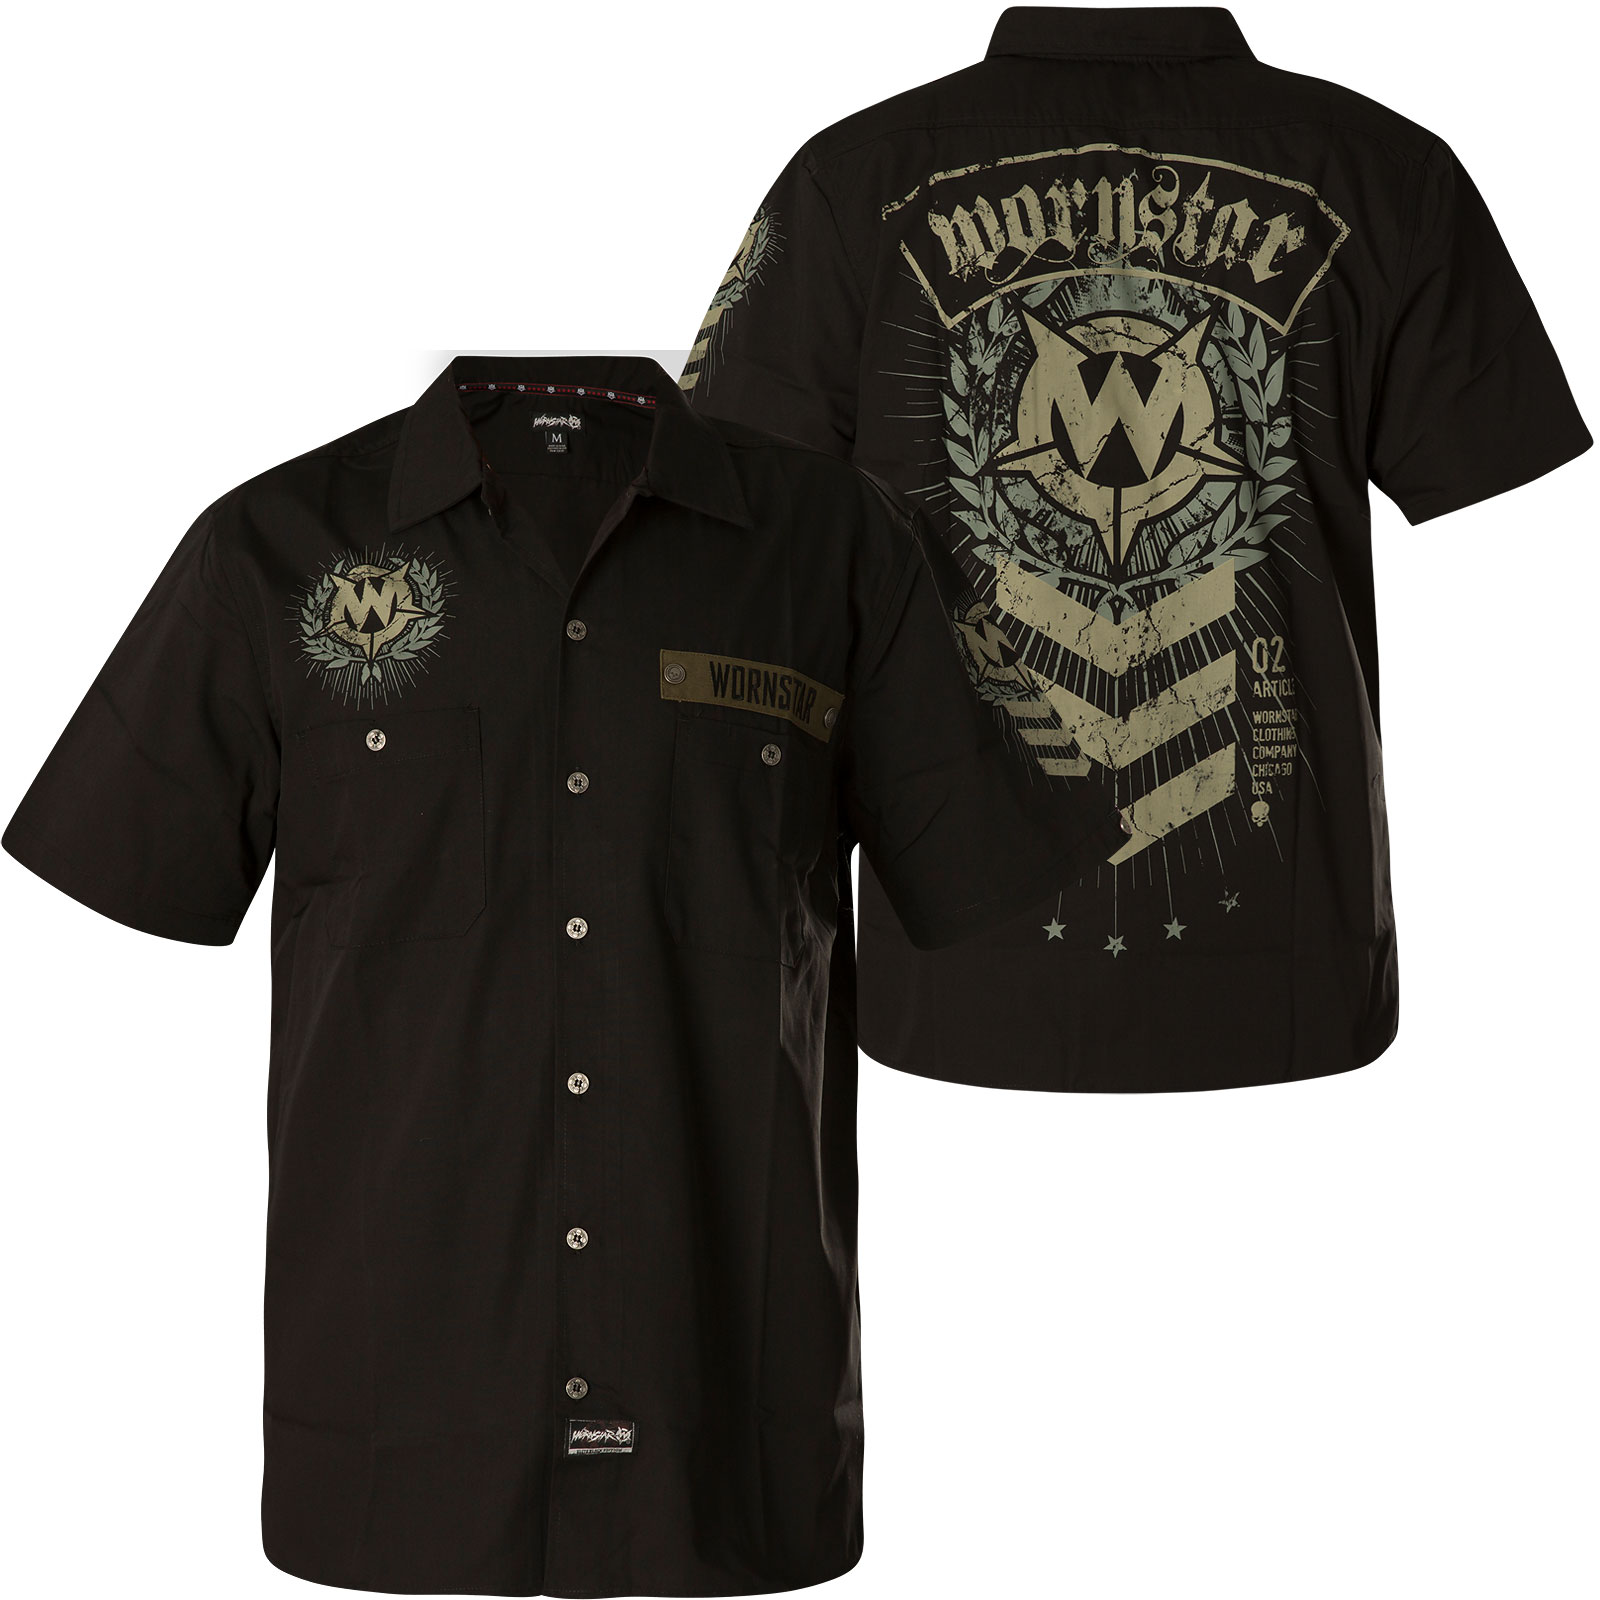 Wornstar Button Down sleeveless Work Shirt SGT in black print and lettering